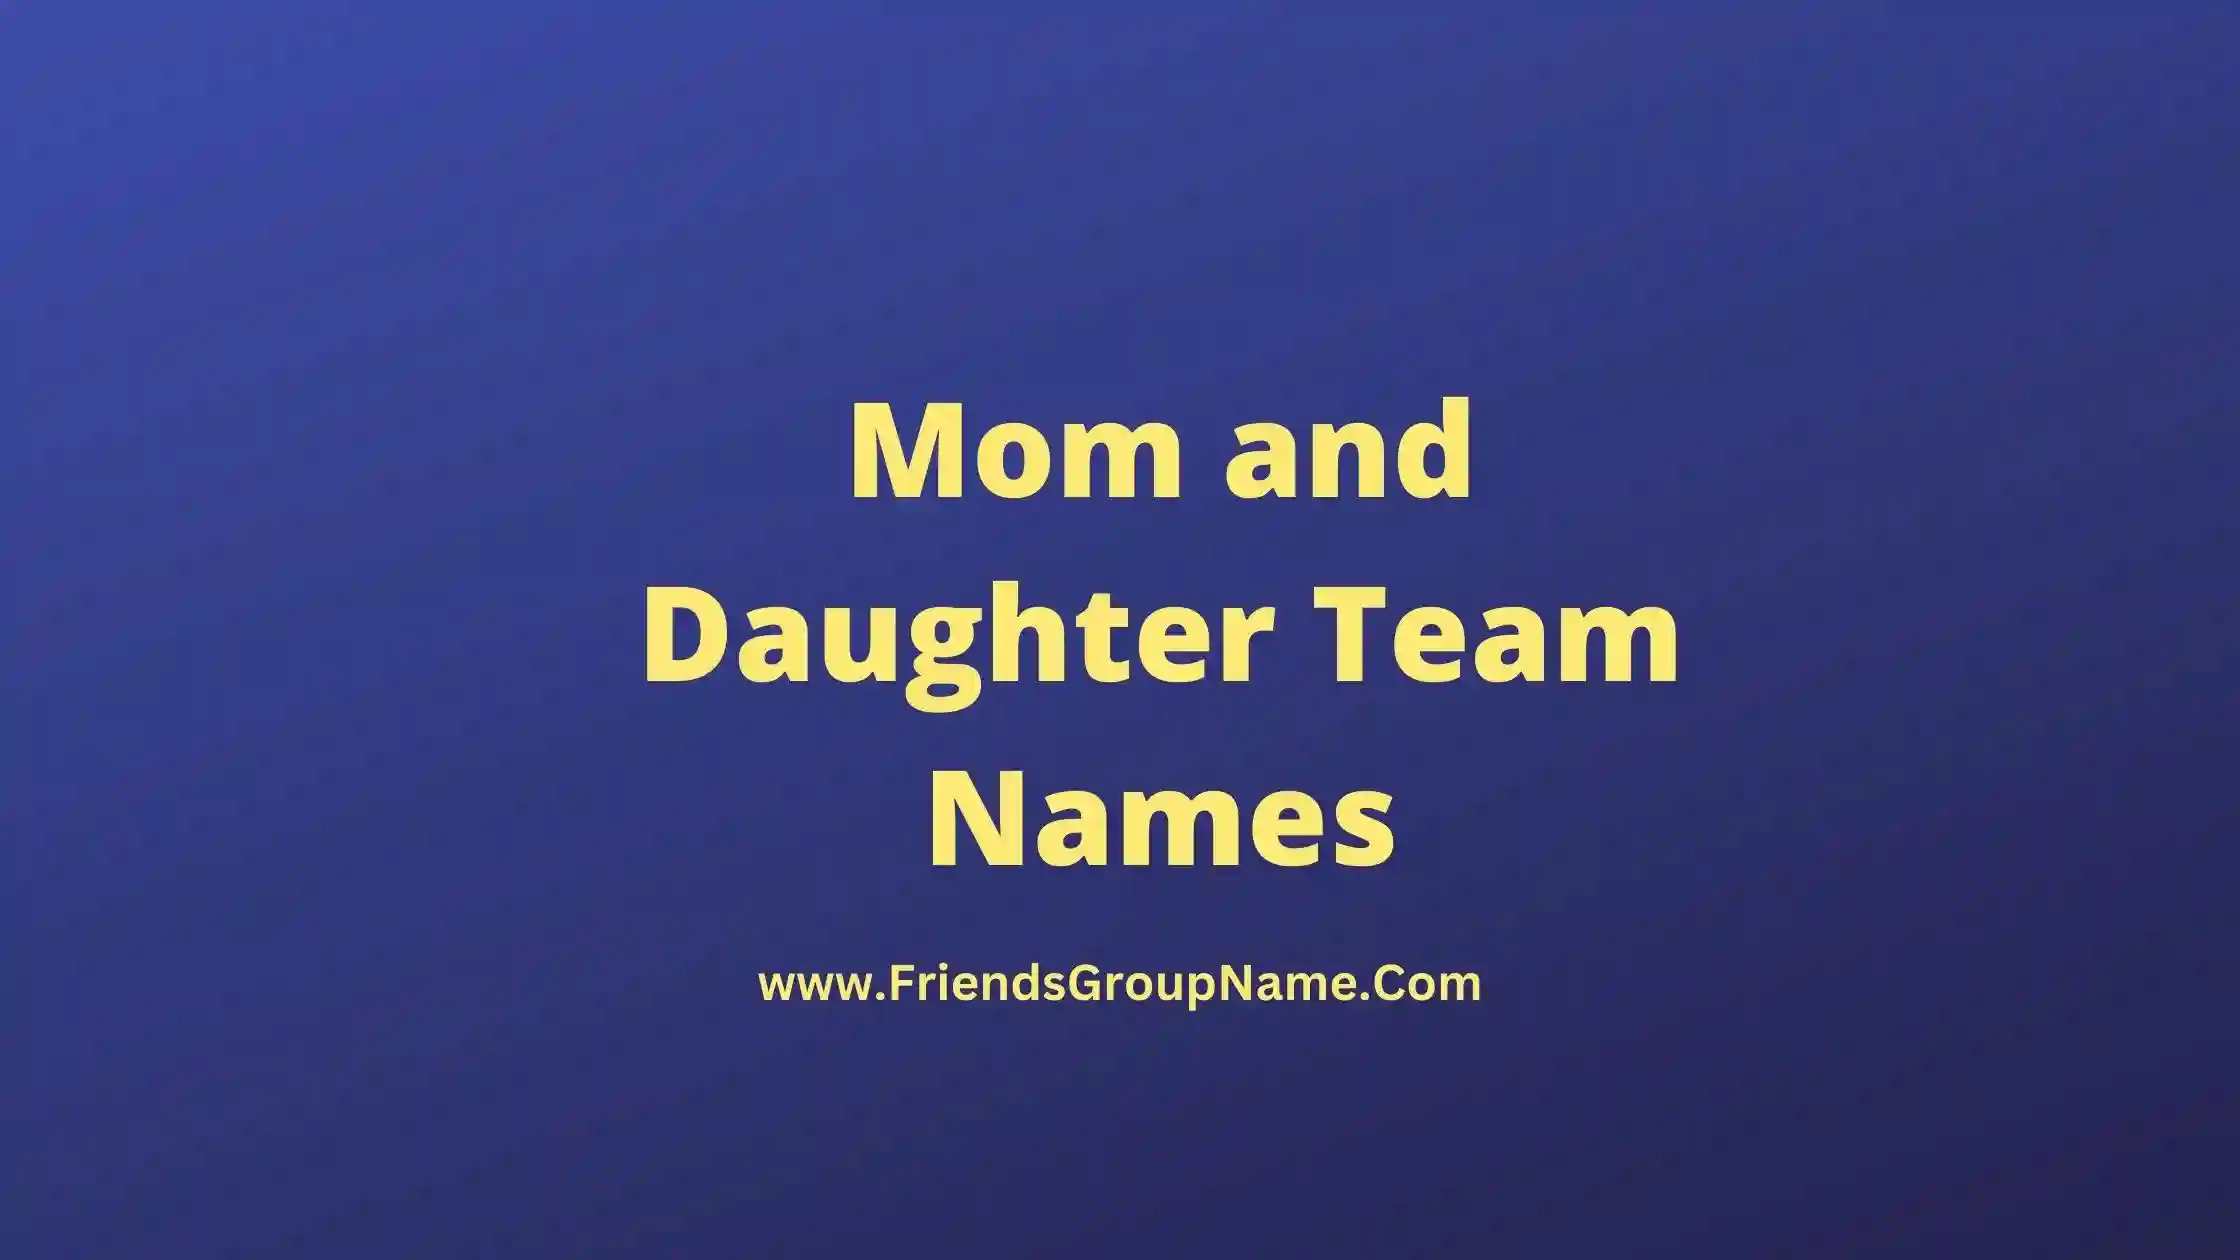 Mom and Daughter Team Names